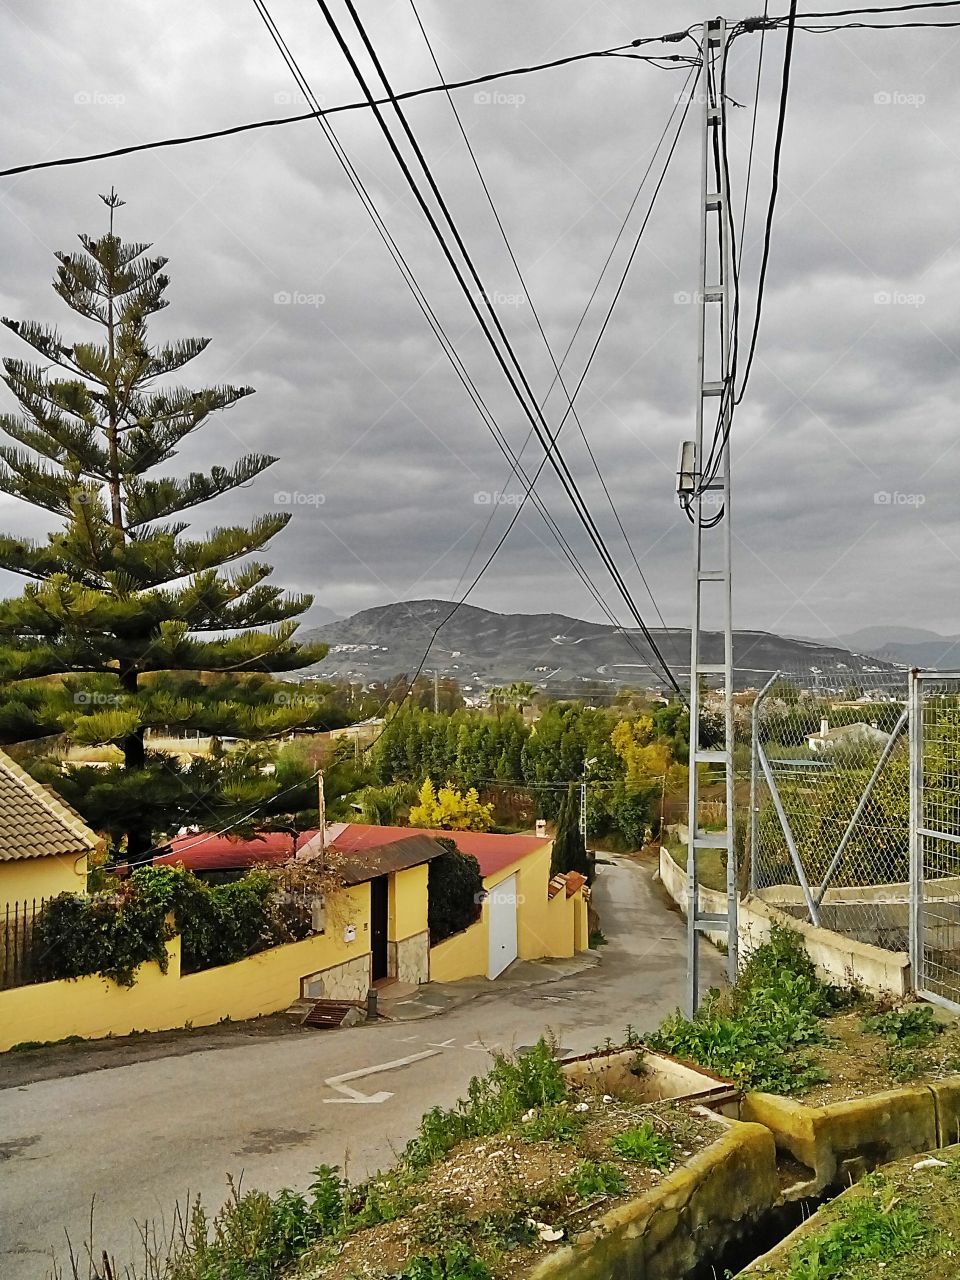 Electric poles and wire in Alhaurin el Grande, spain